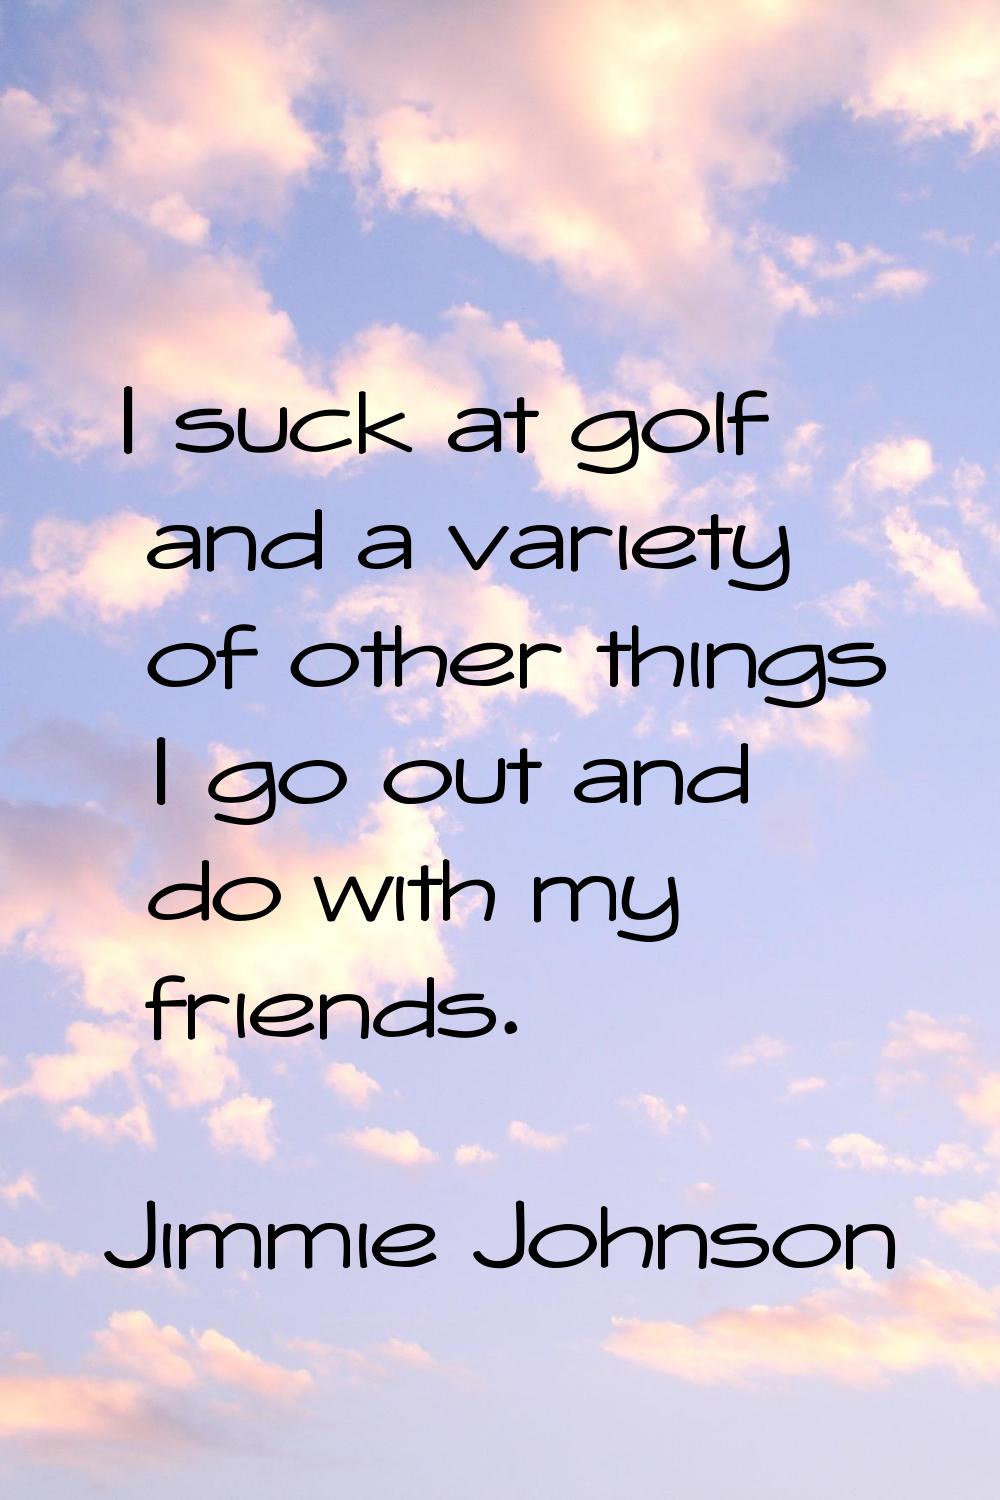 I suck at golf and a variety of other things I go out and do with my friends.